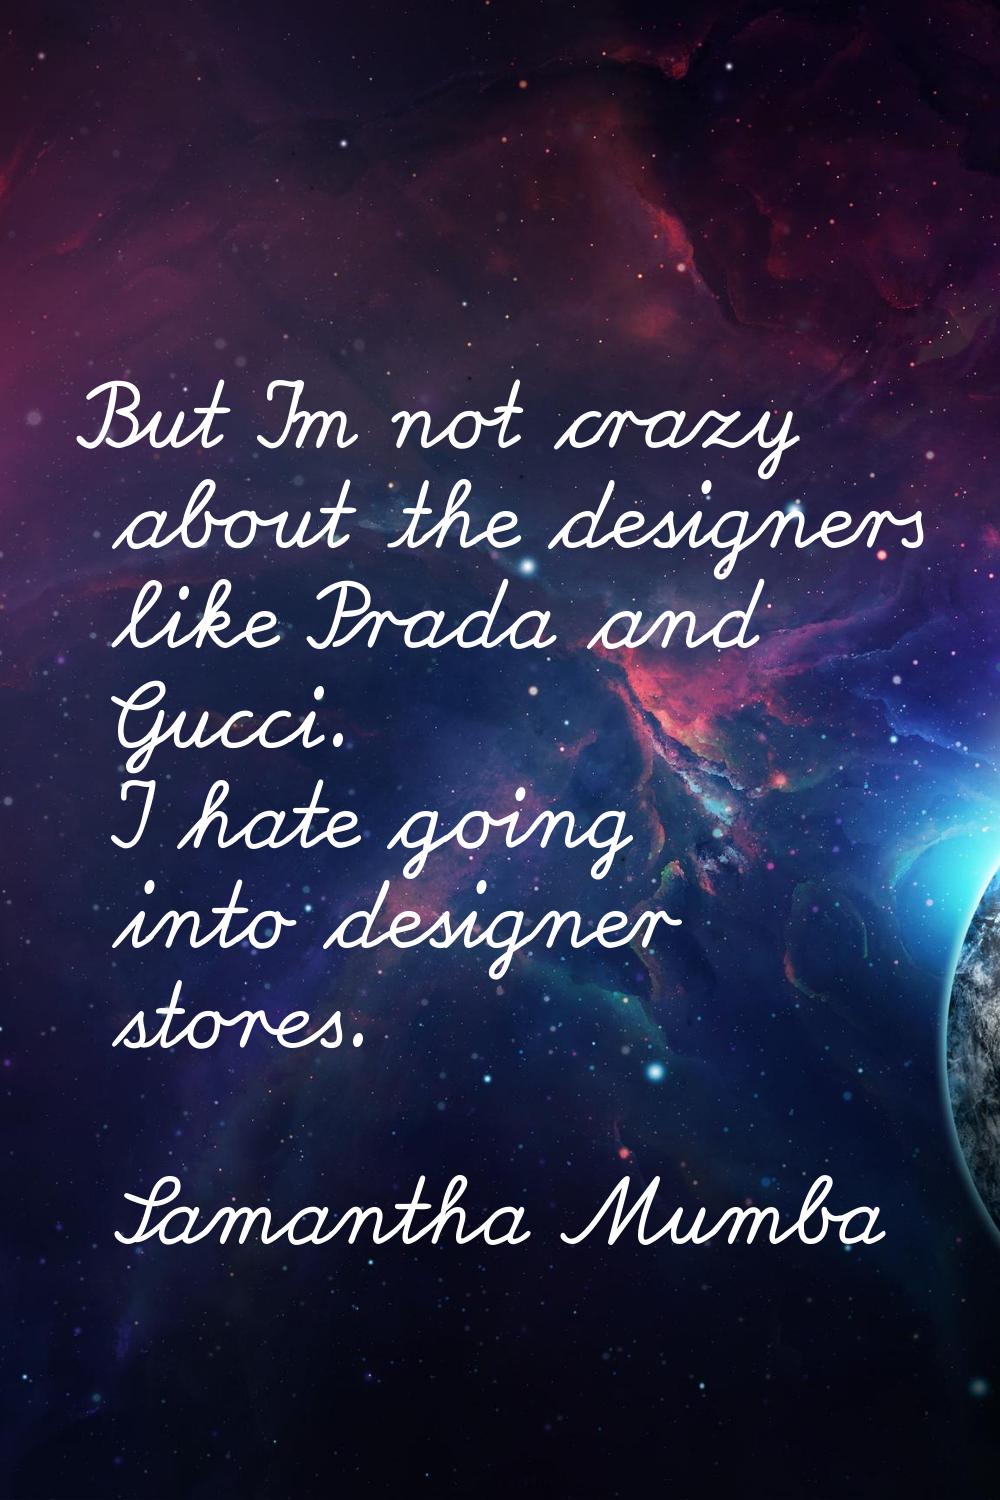 But I'm not crazy about the designers like Prada and Gucci. I hate going into designer stores.